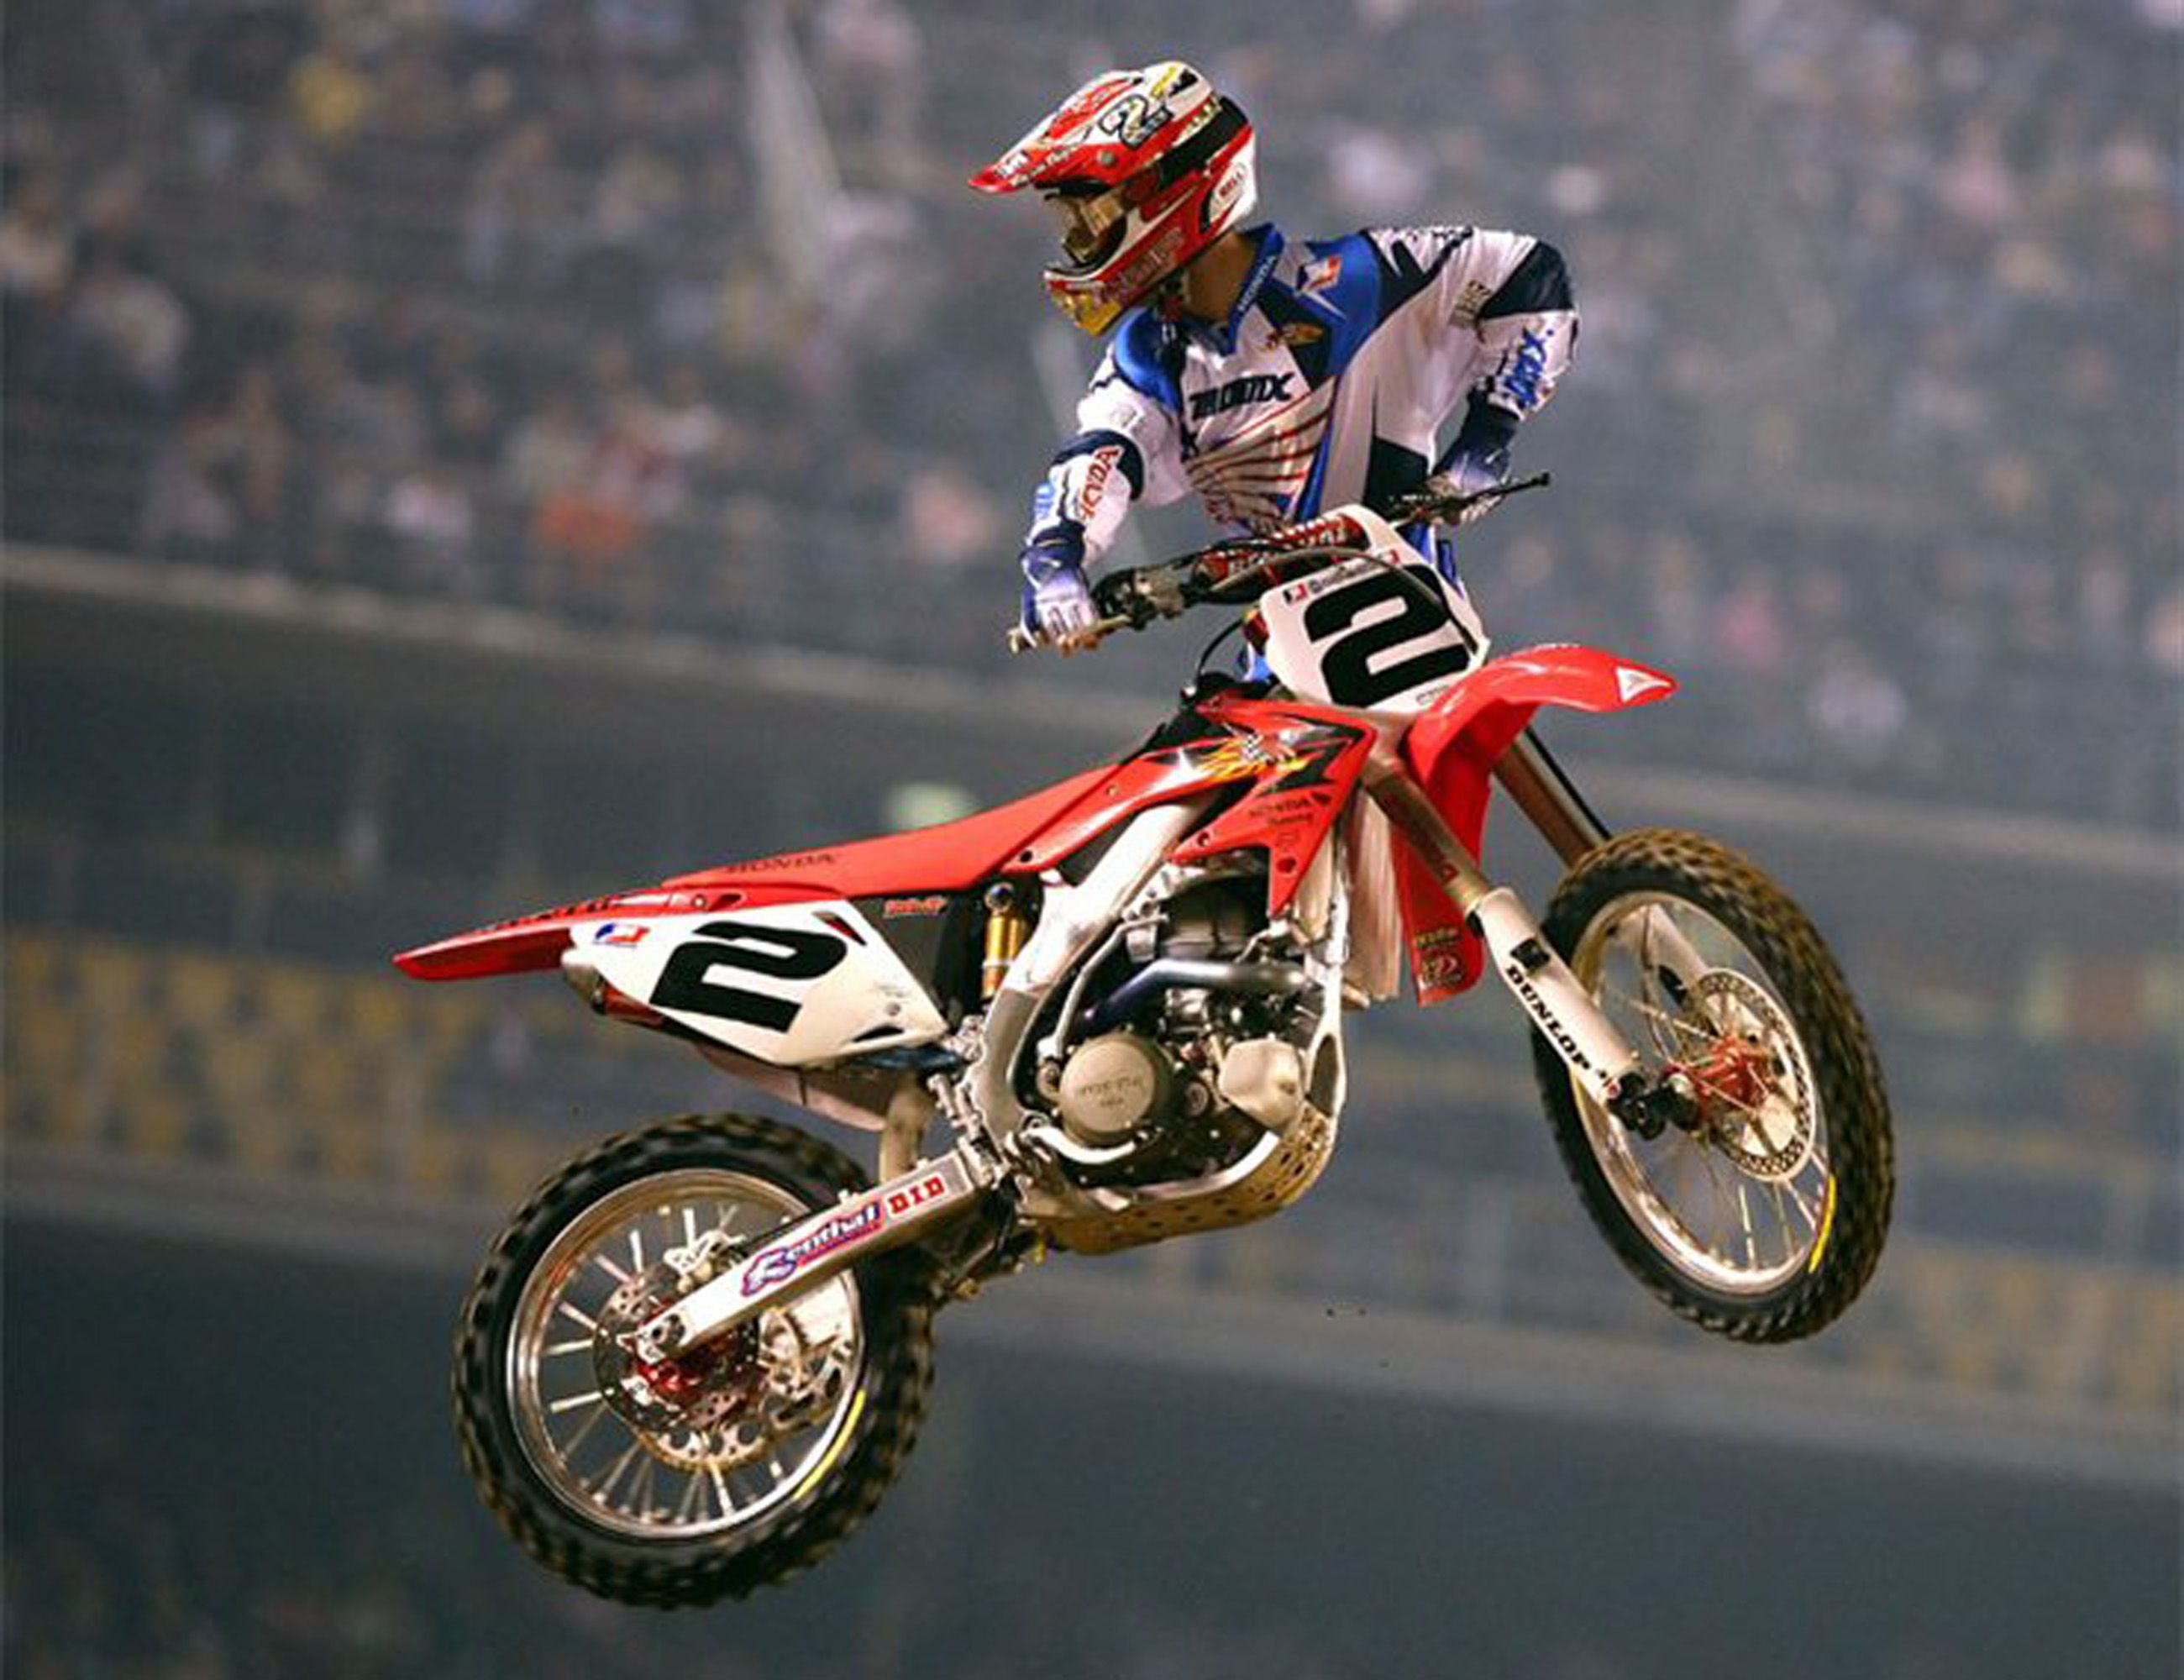 Jeremy McGrath catching some serious air